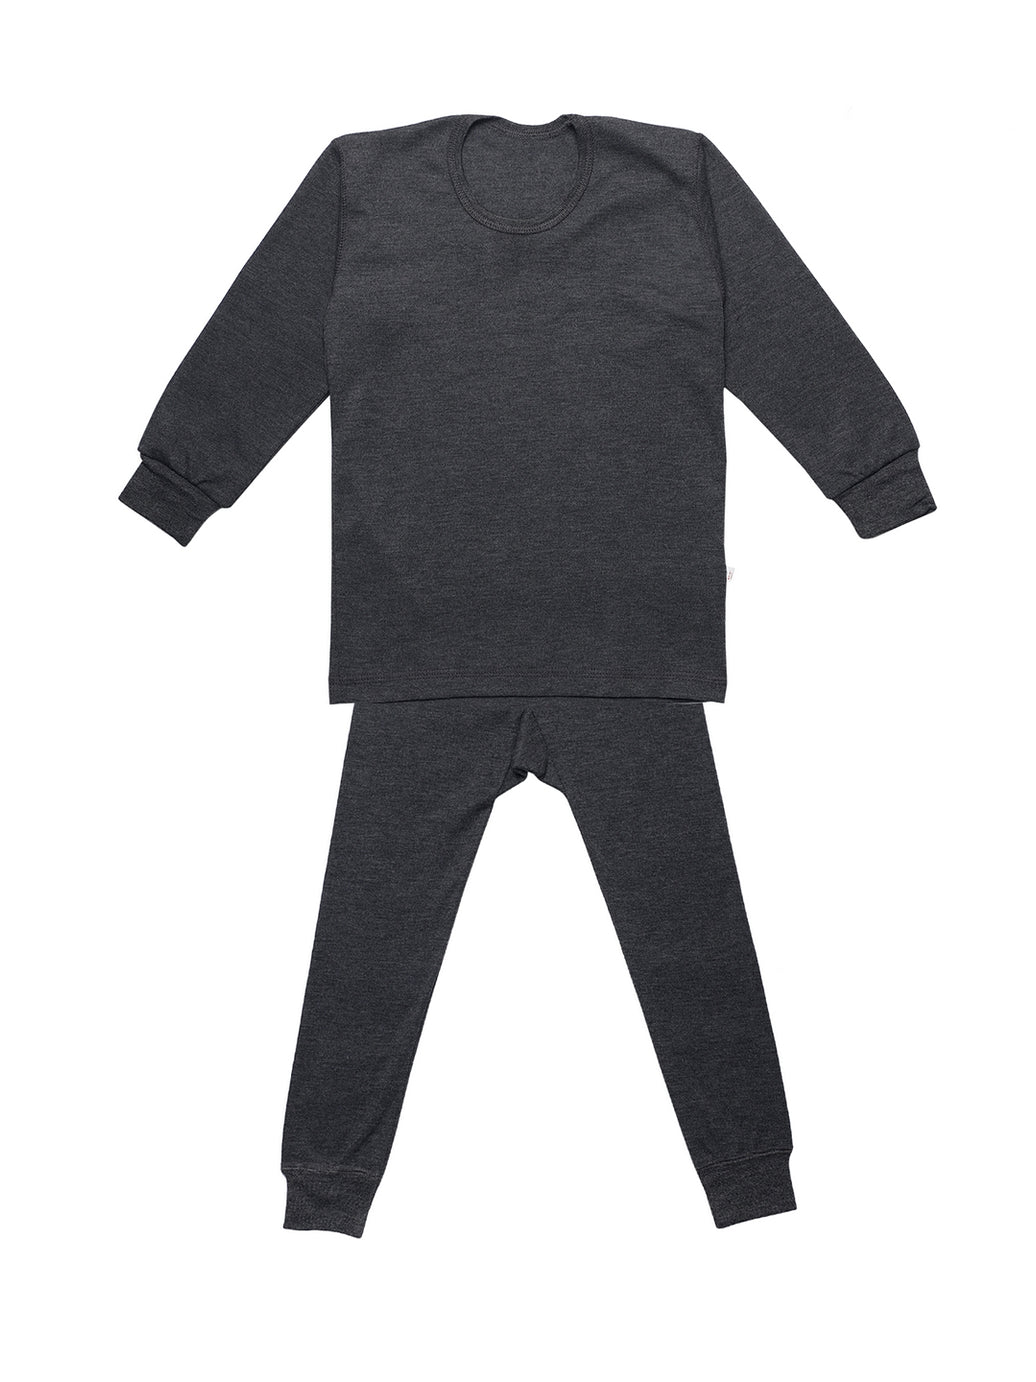 Buy Kids Thermals - Thermal wear Sets for kids Online